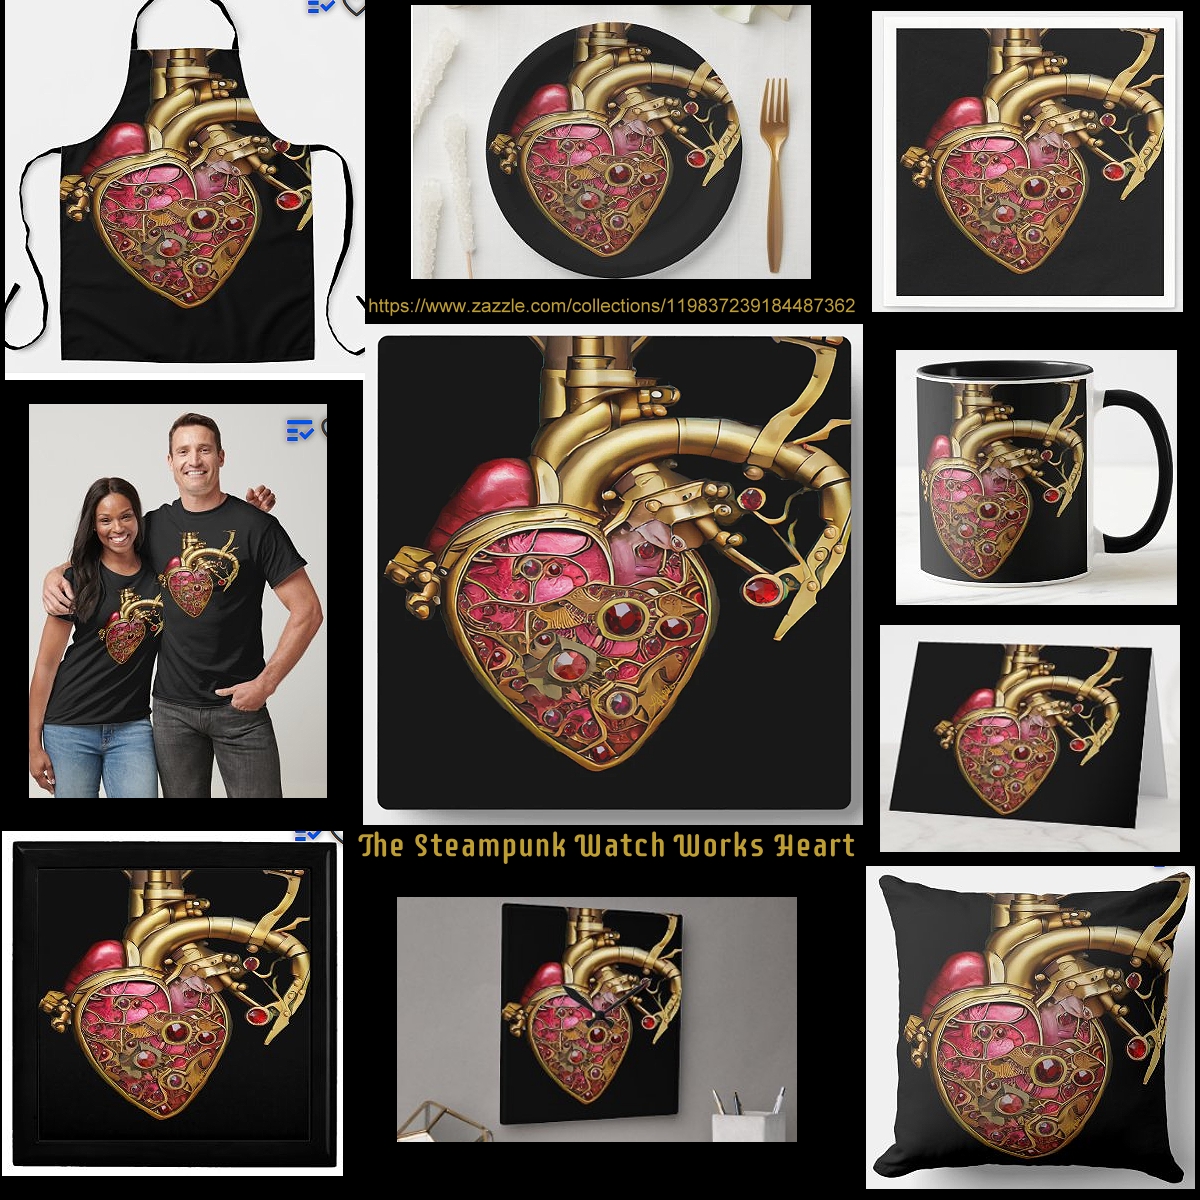 ❤️ 🖤🩸🖤🩸🖤🩸🖤 ❤️ Check Your Pulse - Steampunk Anatomical Heart zazzle.com/collections/st… #art #heart #heartdoctor #steampunkart #steampunk #gifts #giftideas #anatomicalheart #watchwork #theoldticker #greetingcards #tshirts #apron #mugs #clocks Paper #napkins #plates #giftbox